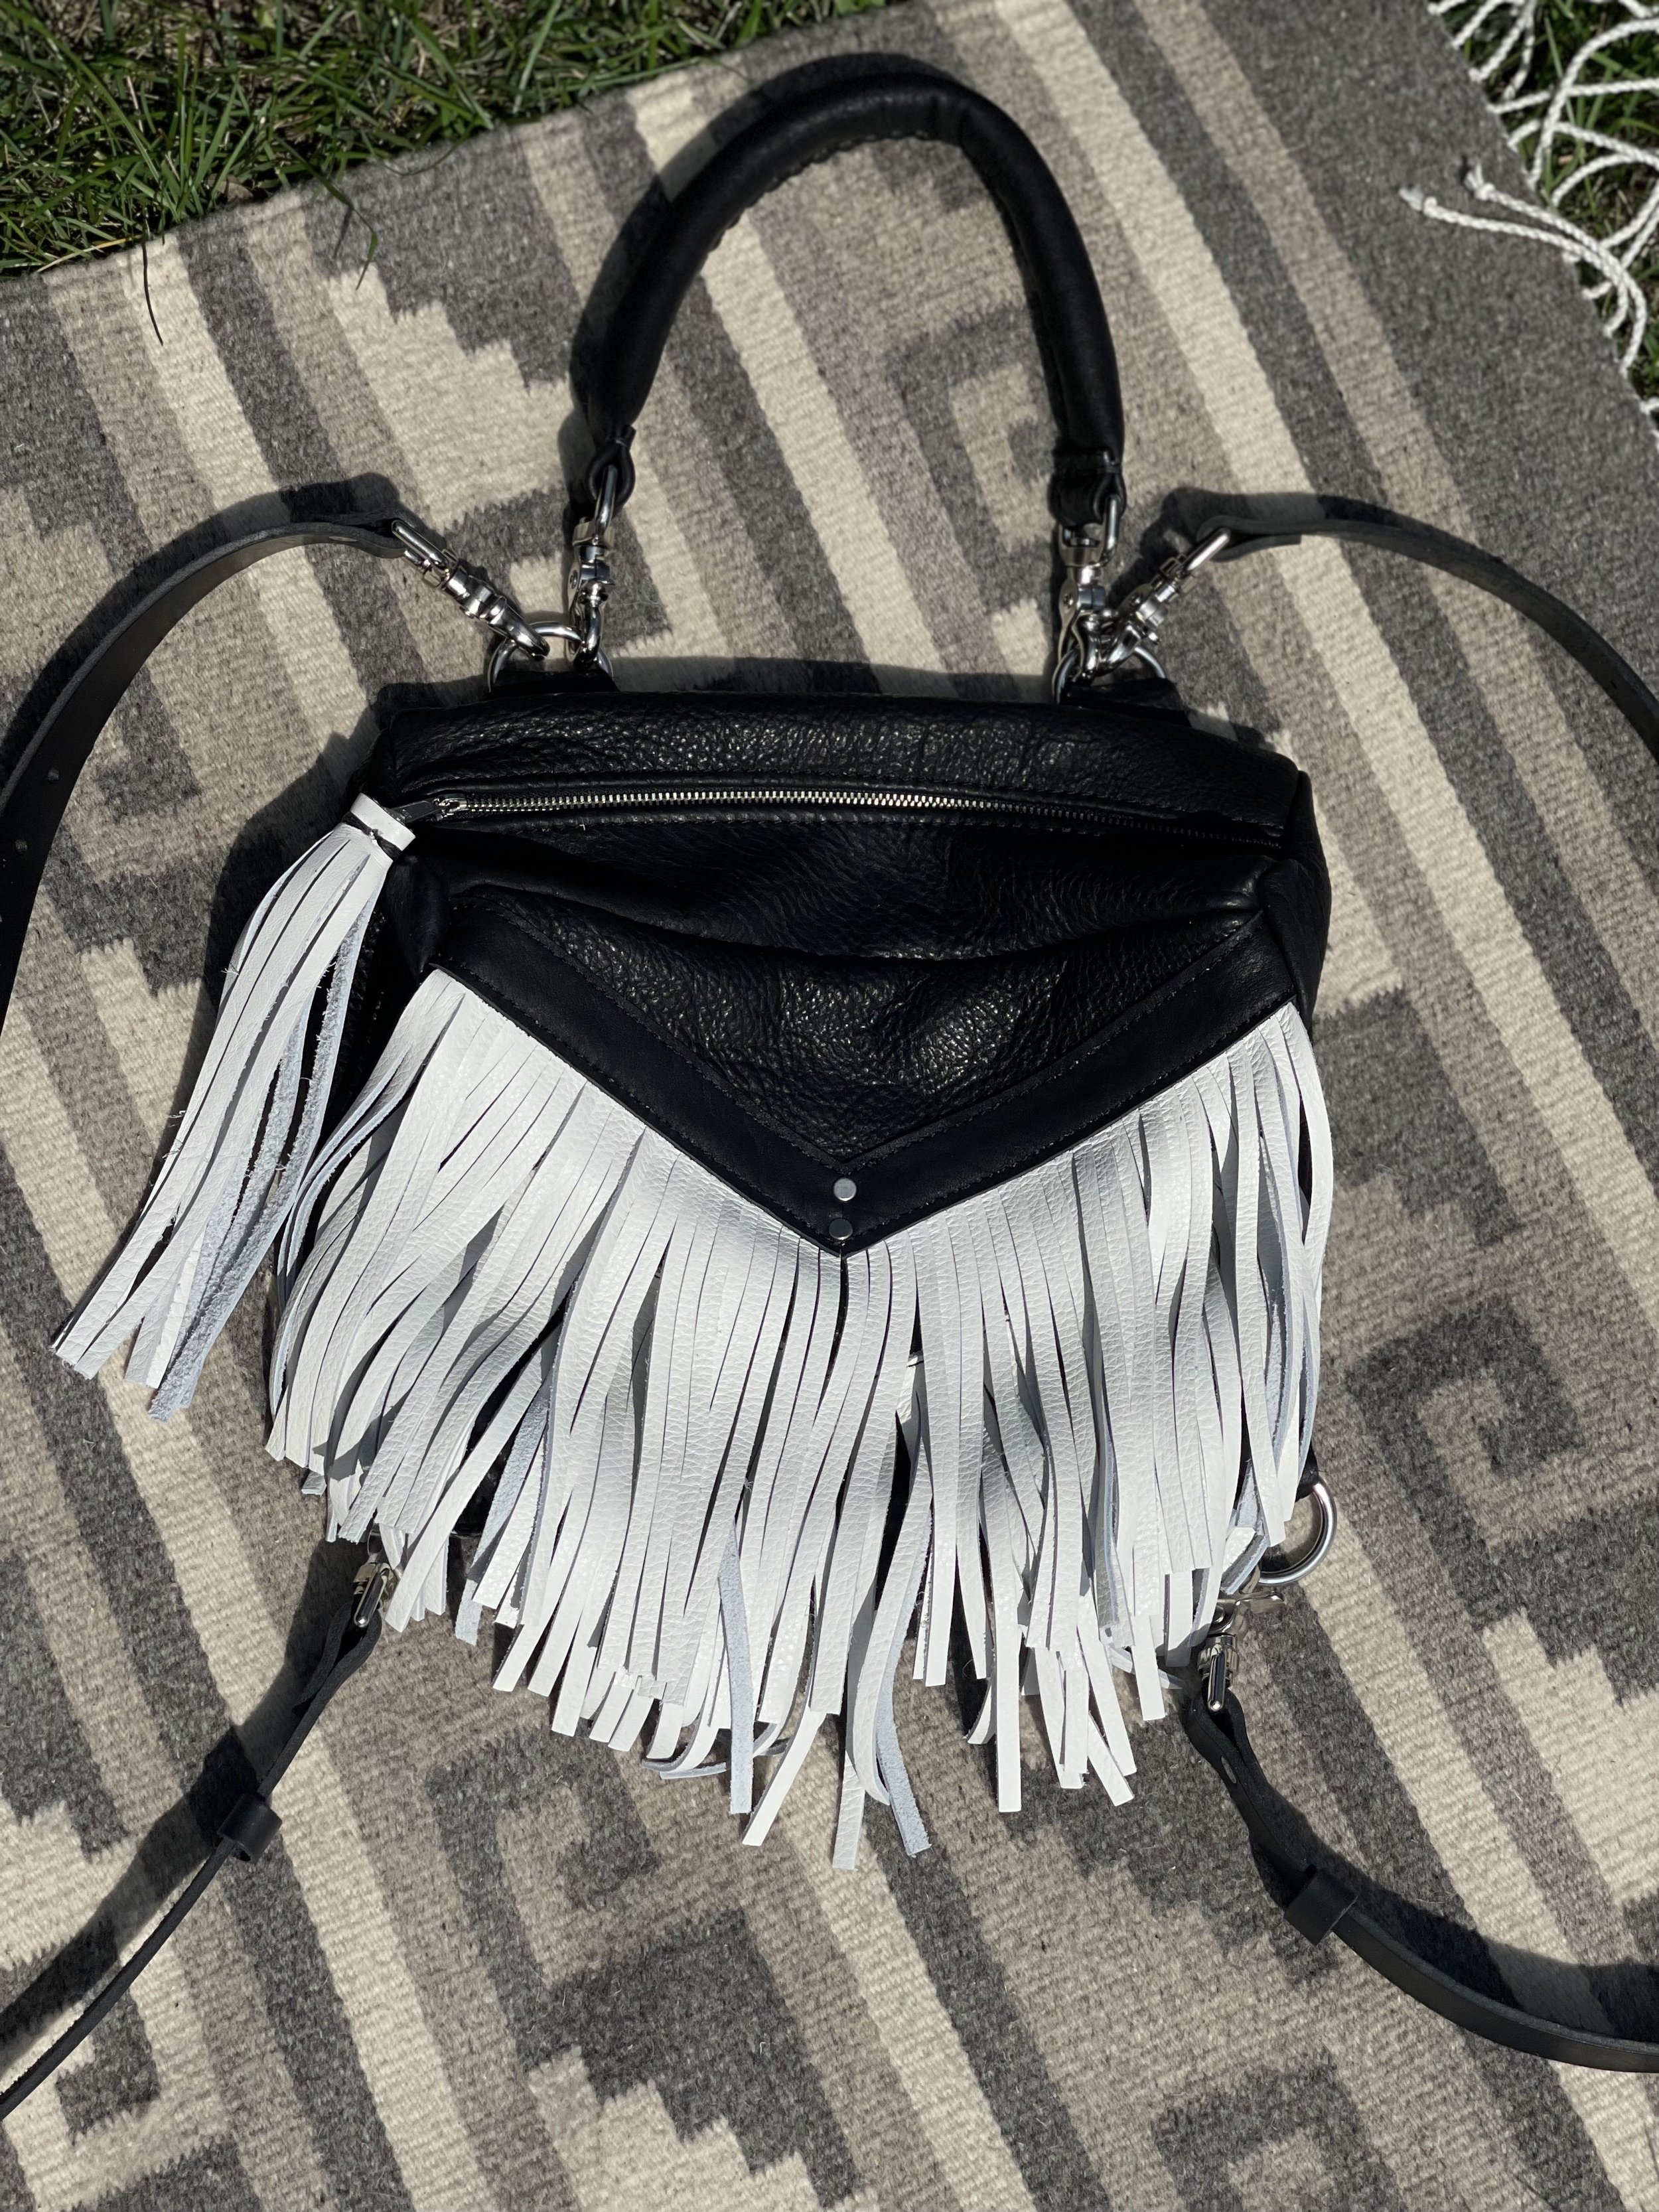 Mini Melissa Convertible Bag - black bison leather, white cowhide leather fringe, nickel hardware, Clip On Puffy Handle